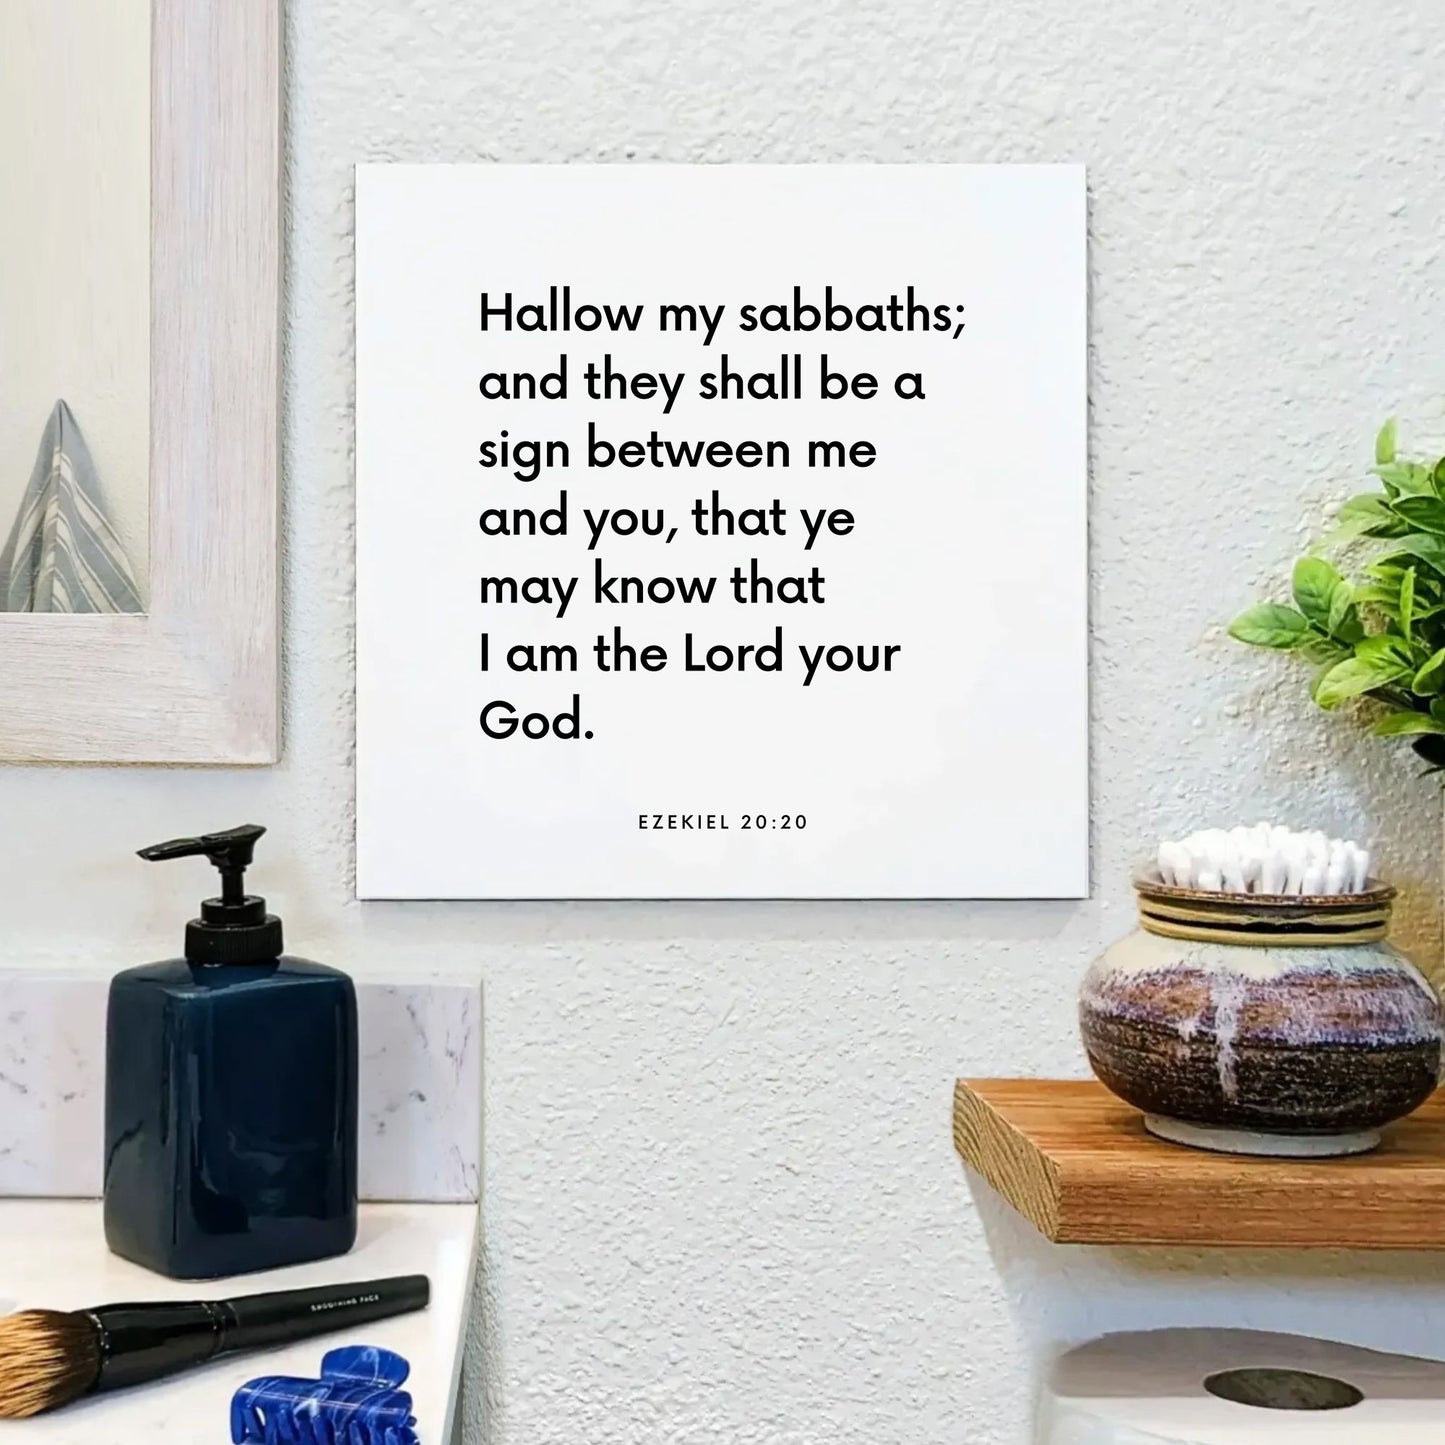 Bathroom mouting of the scripture tile for Ezekiel 20:20 - "Hallow my sabbaths; and they shall be a sign"